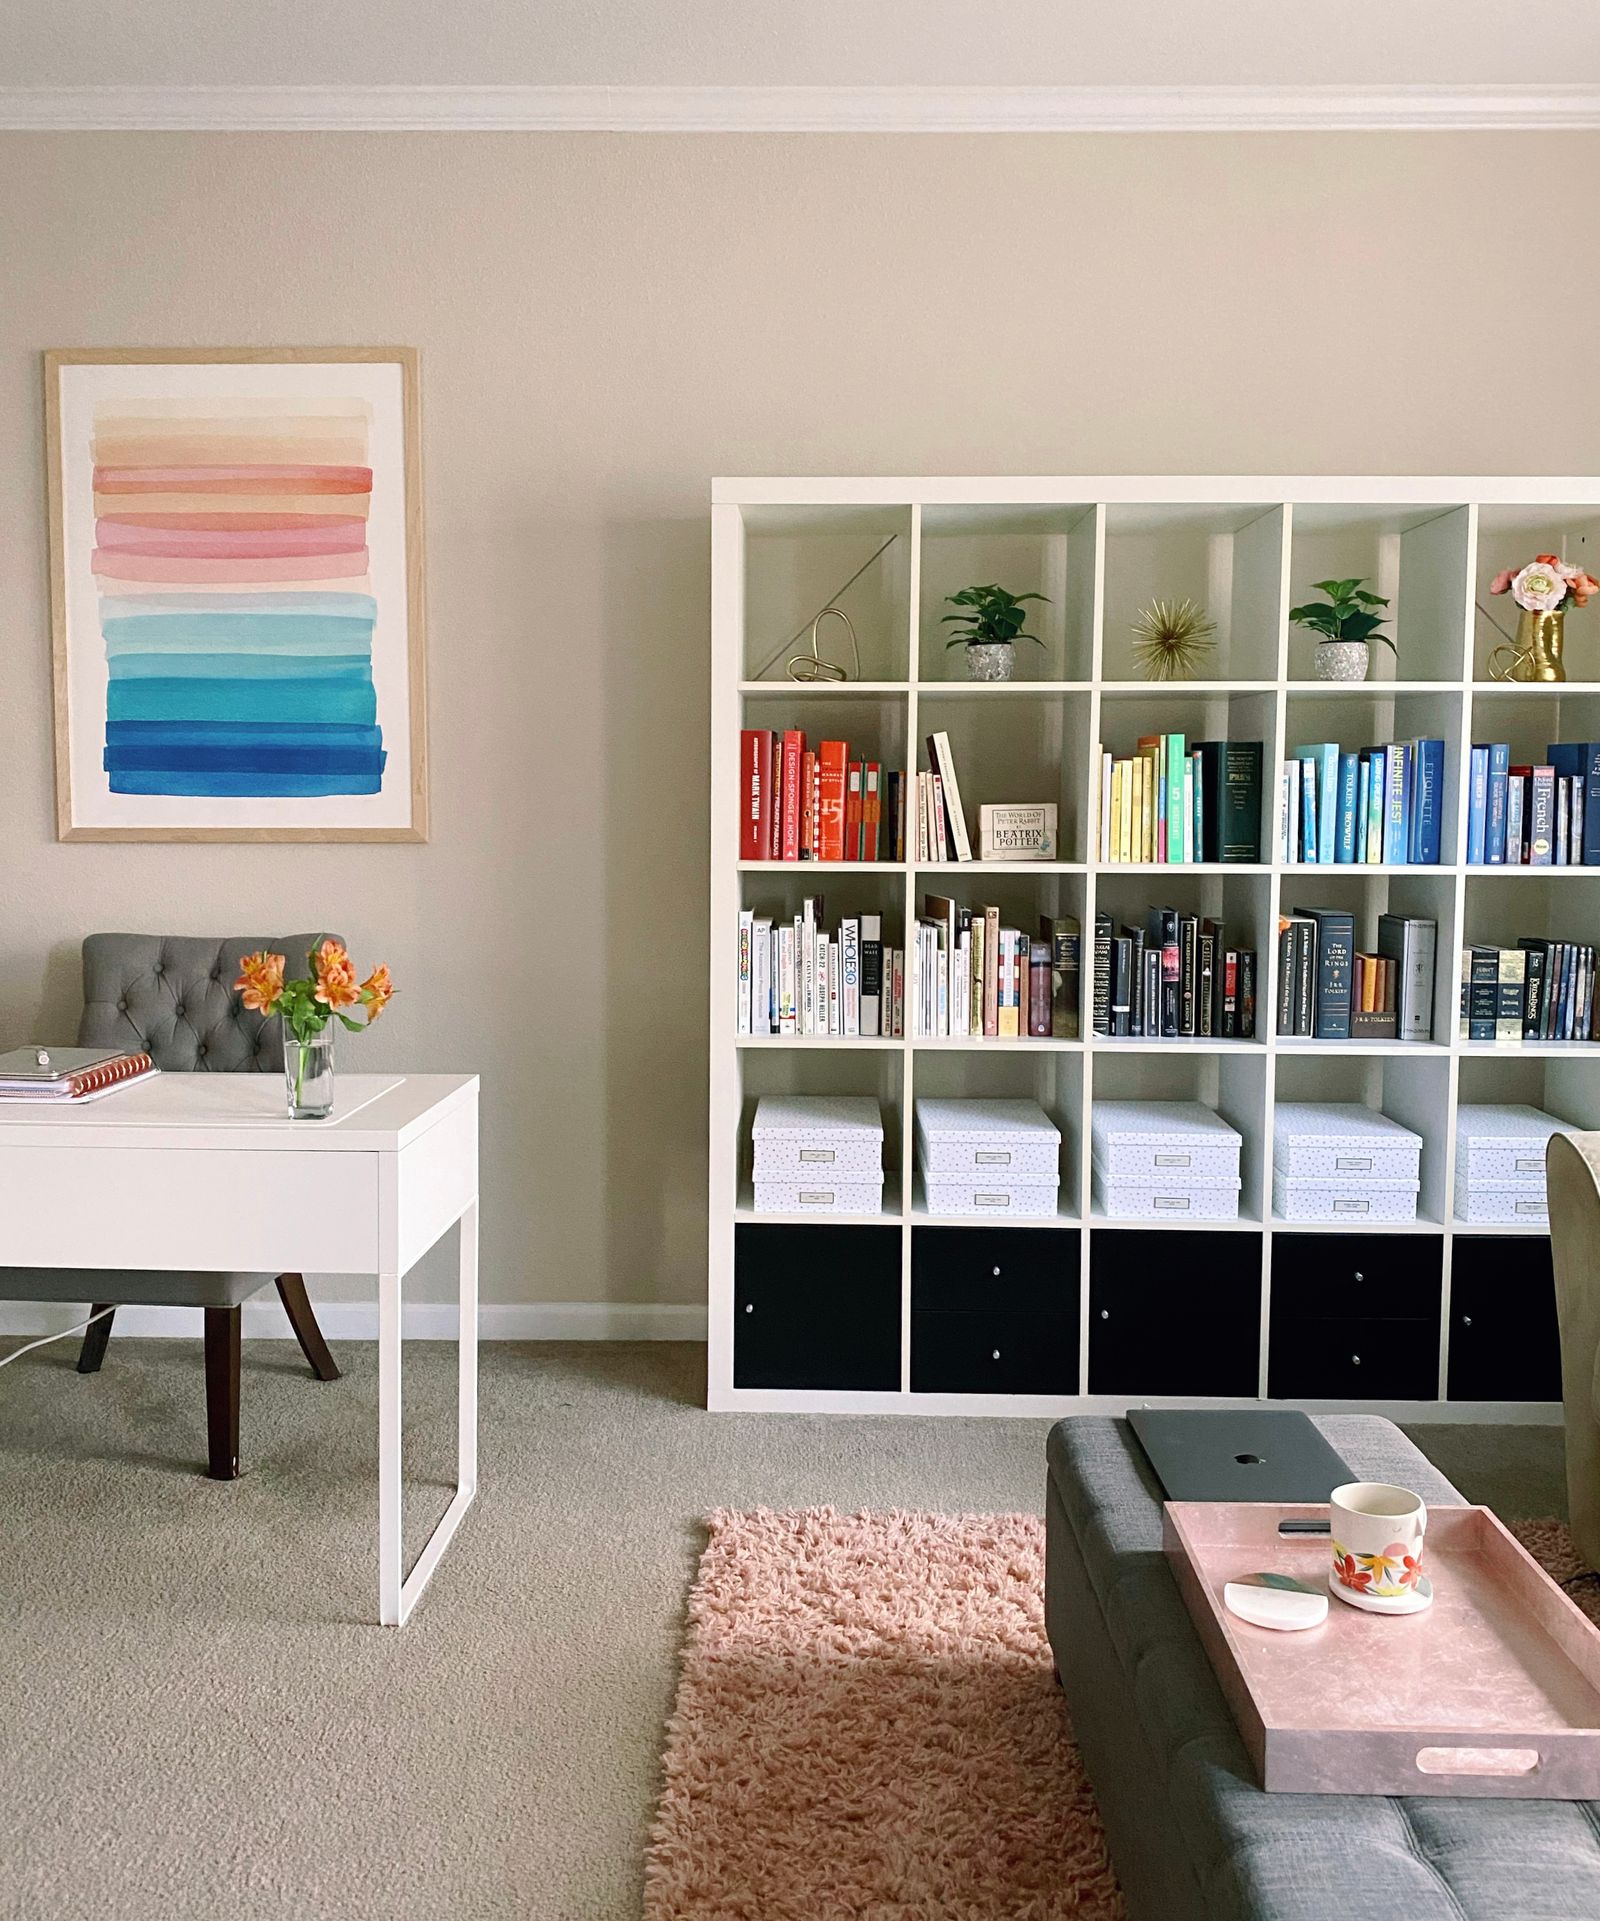 living room with watercolor art on the walls, a simple desk with fresh flowers, and shelves full of color-coded books and simple decor